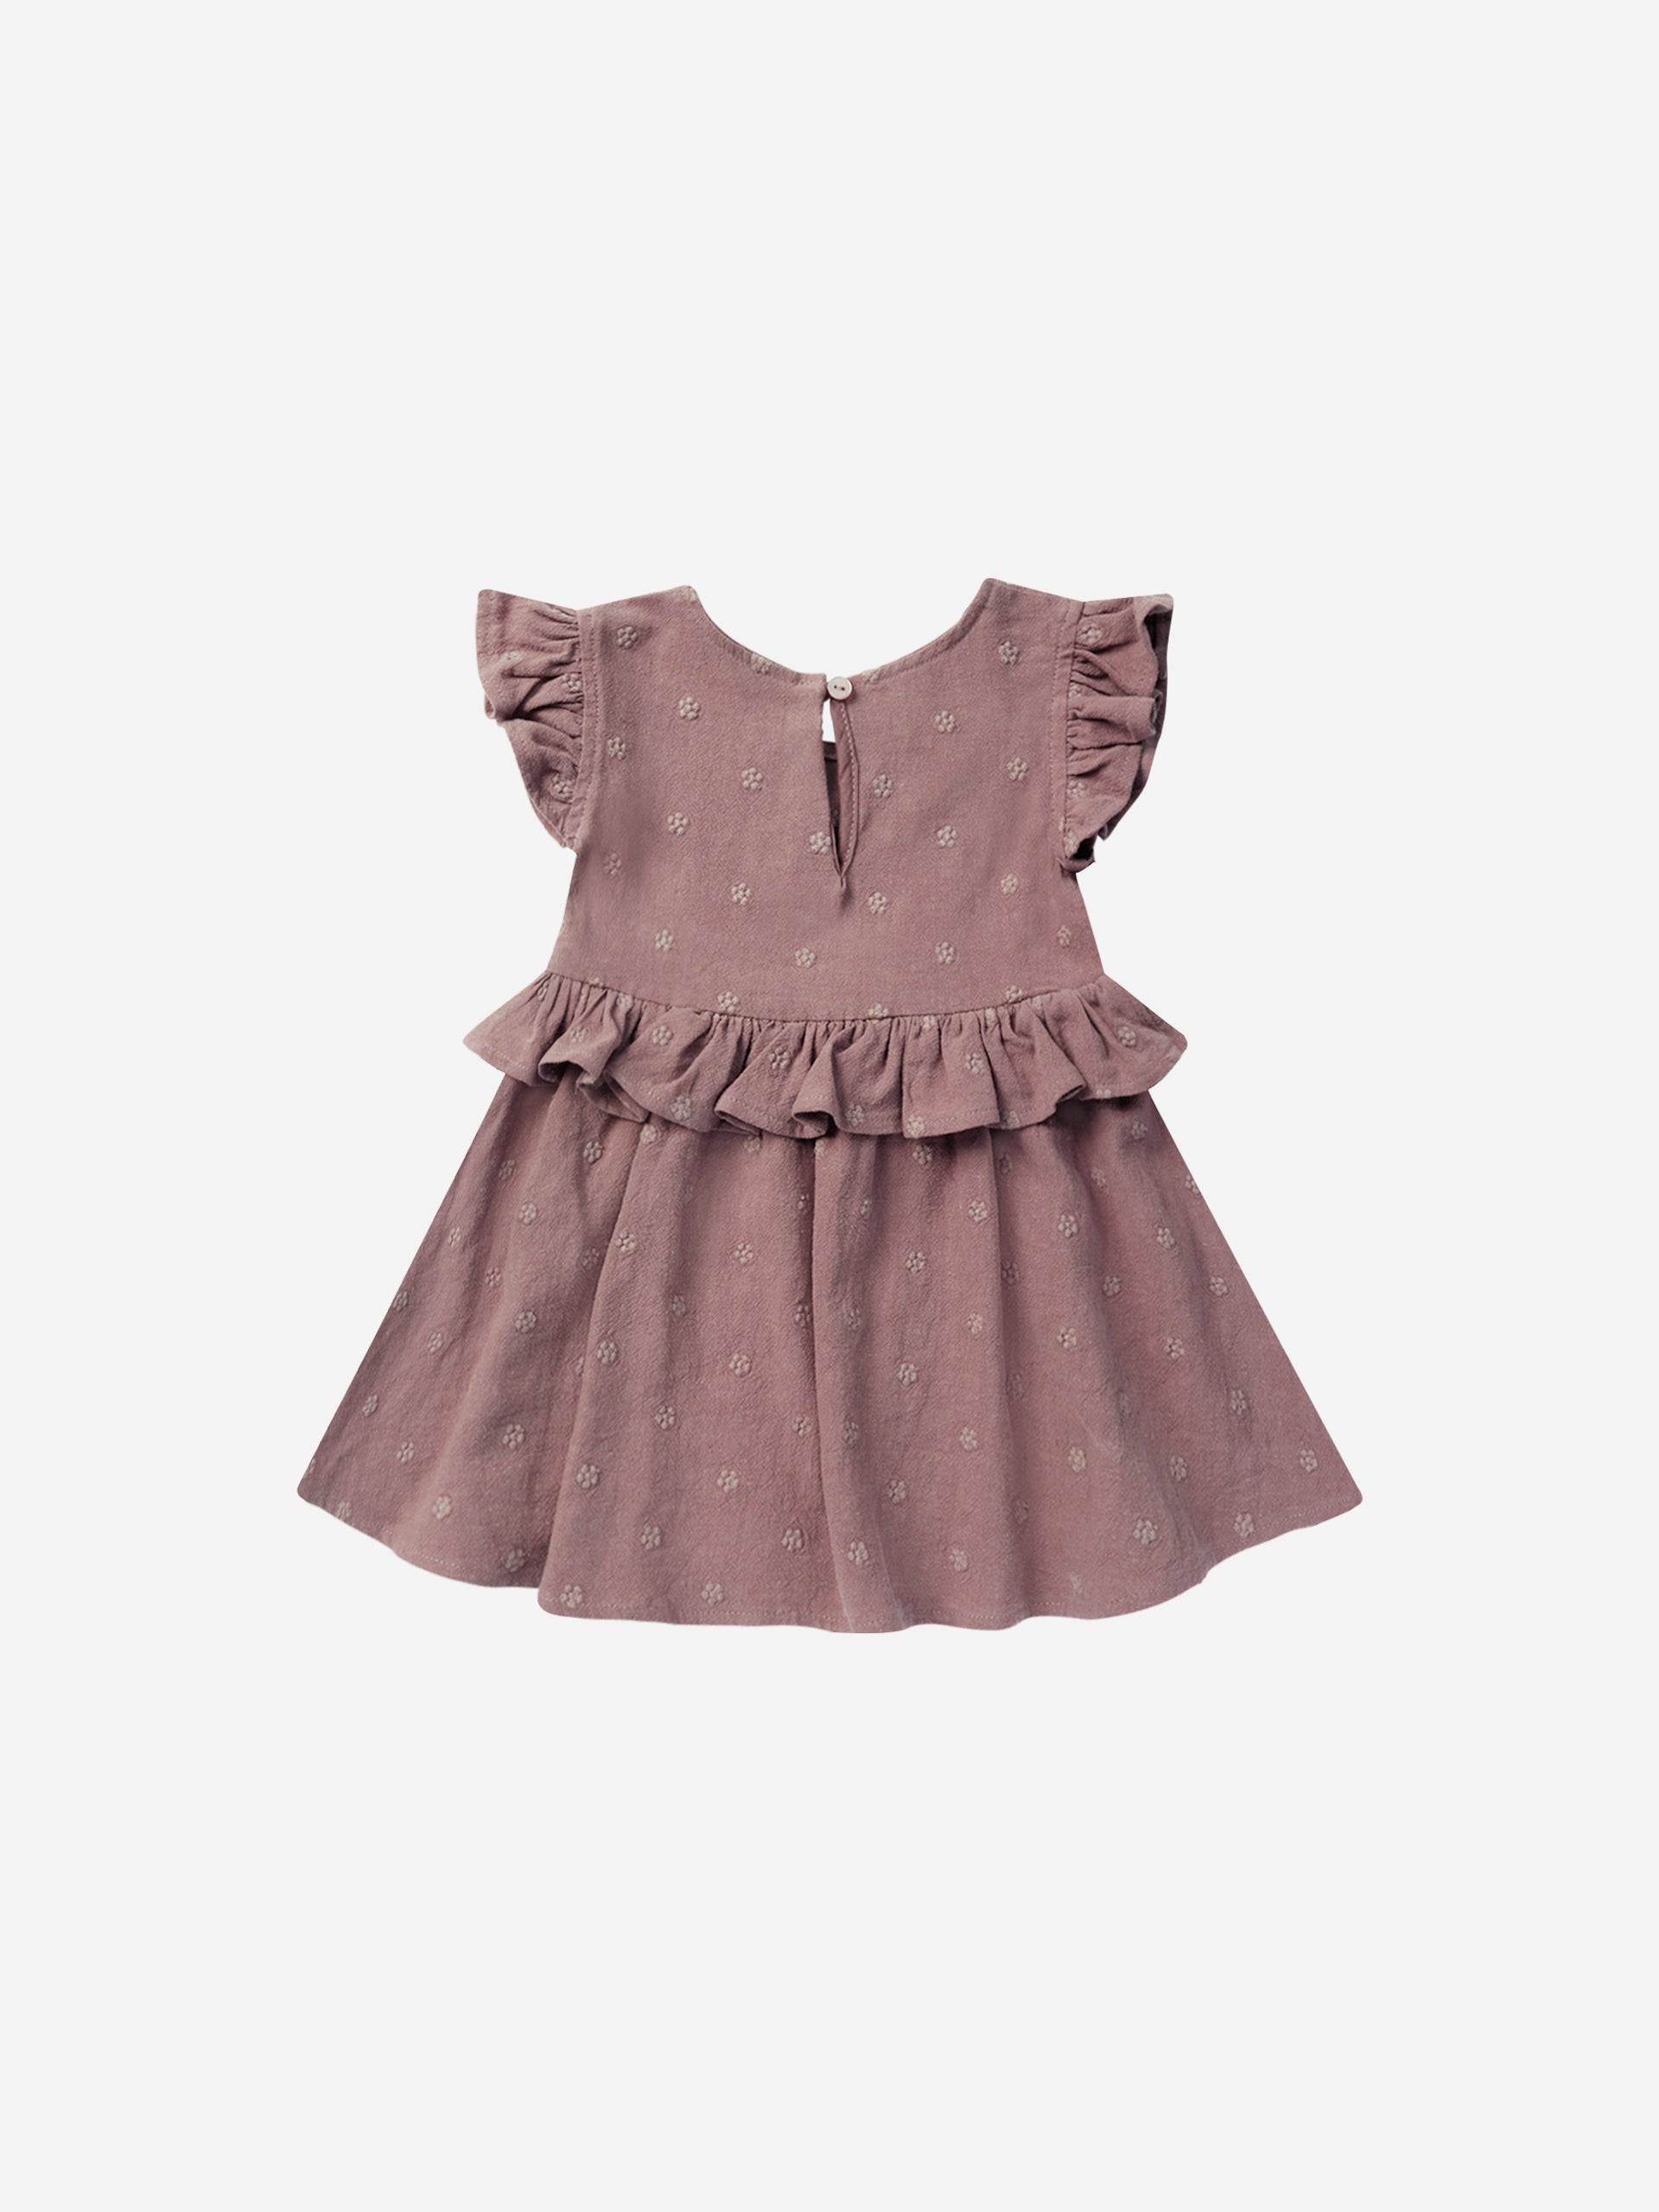 Brielle Dress || Mulberry Daisy - Rylee + Cru | Kids Clothes | Trendy Baby Clothes | Modern Infant Outfits |